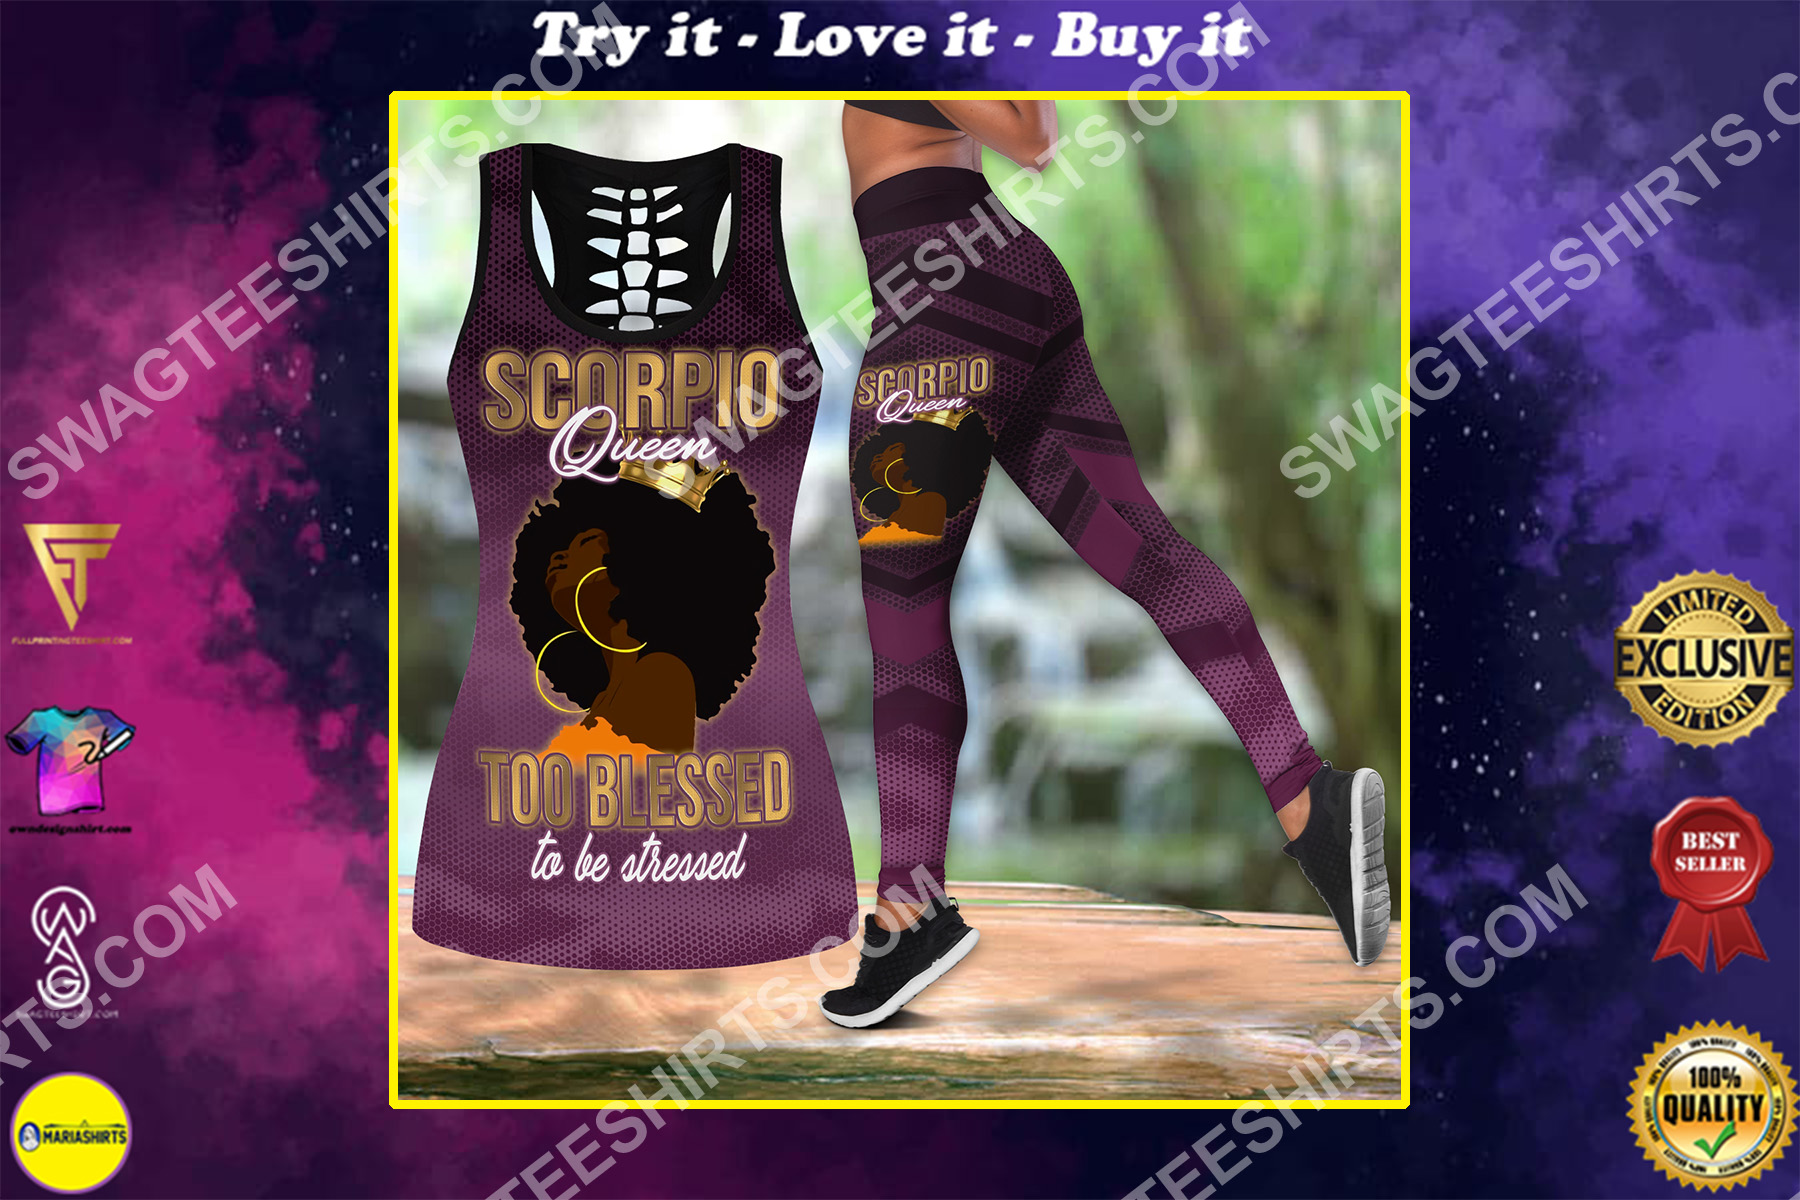 scorpio queen too blessed to be stressed birthday gift set sports outfit